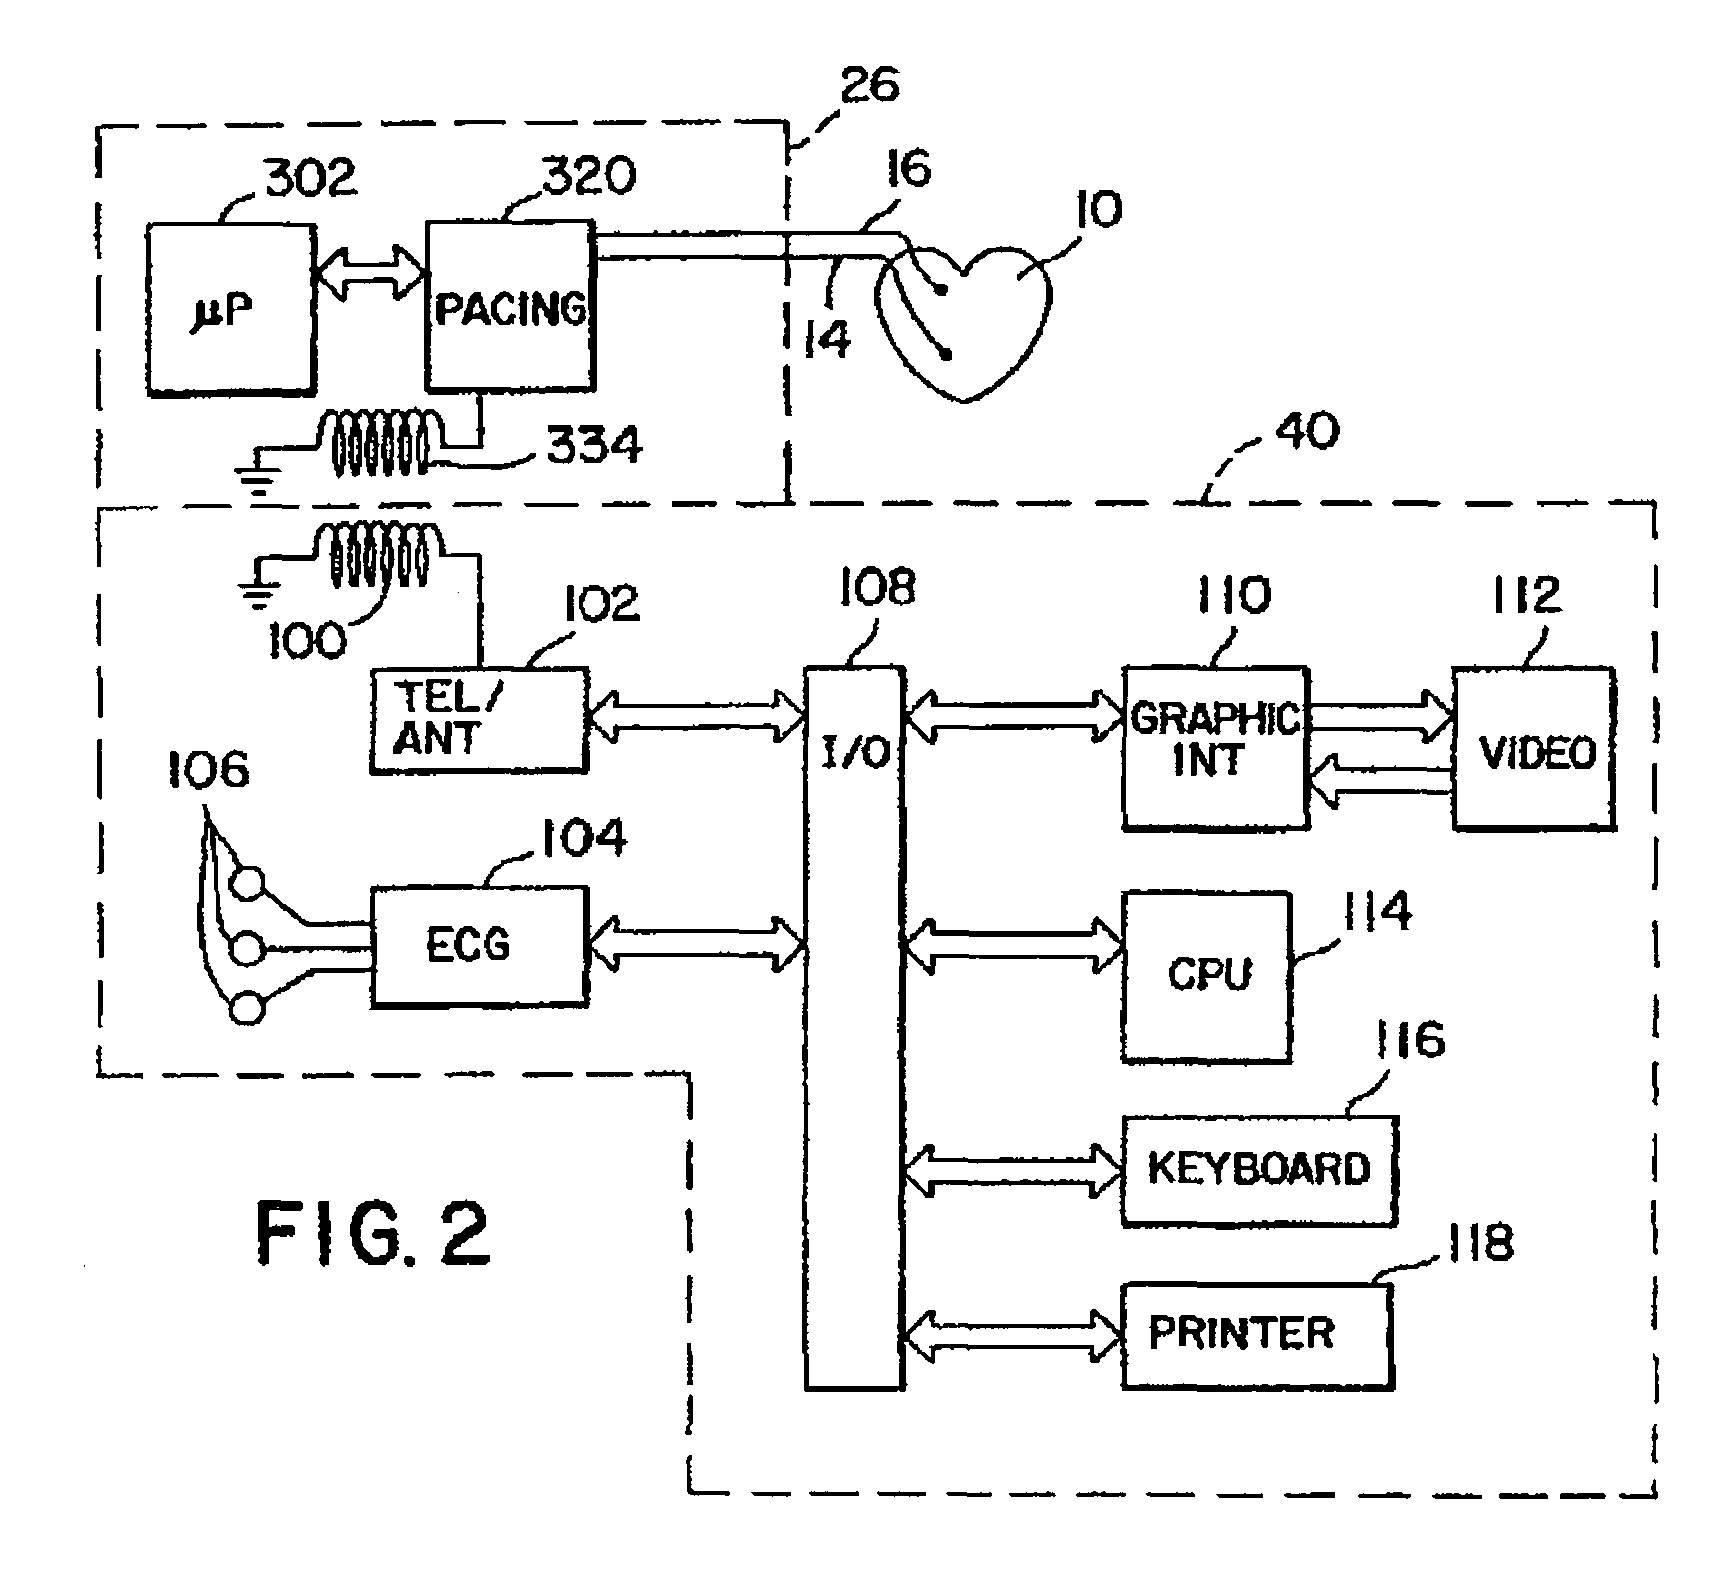 Cardiac pacing apparatus and method for continuous capture management